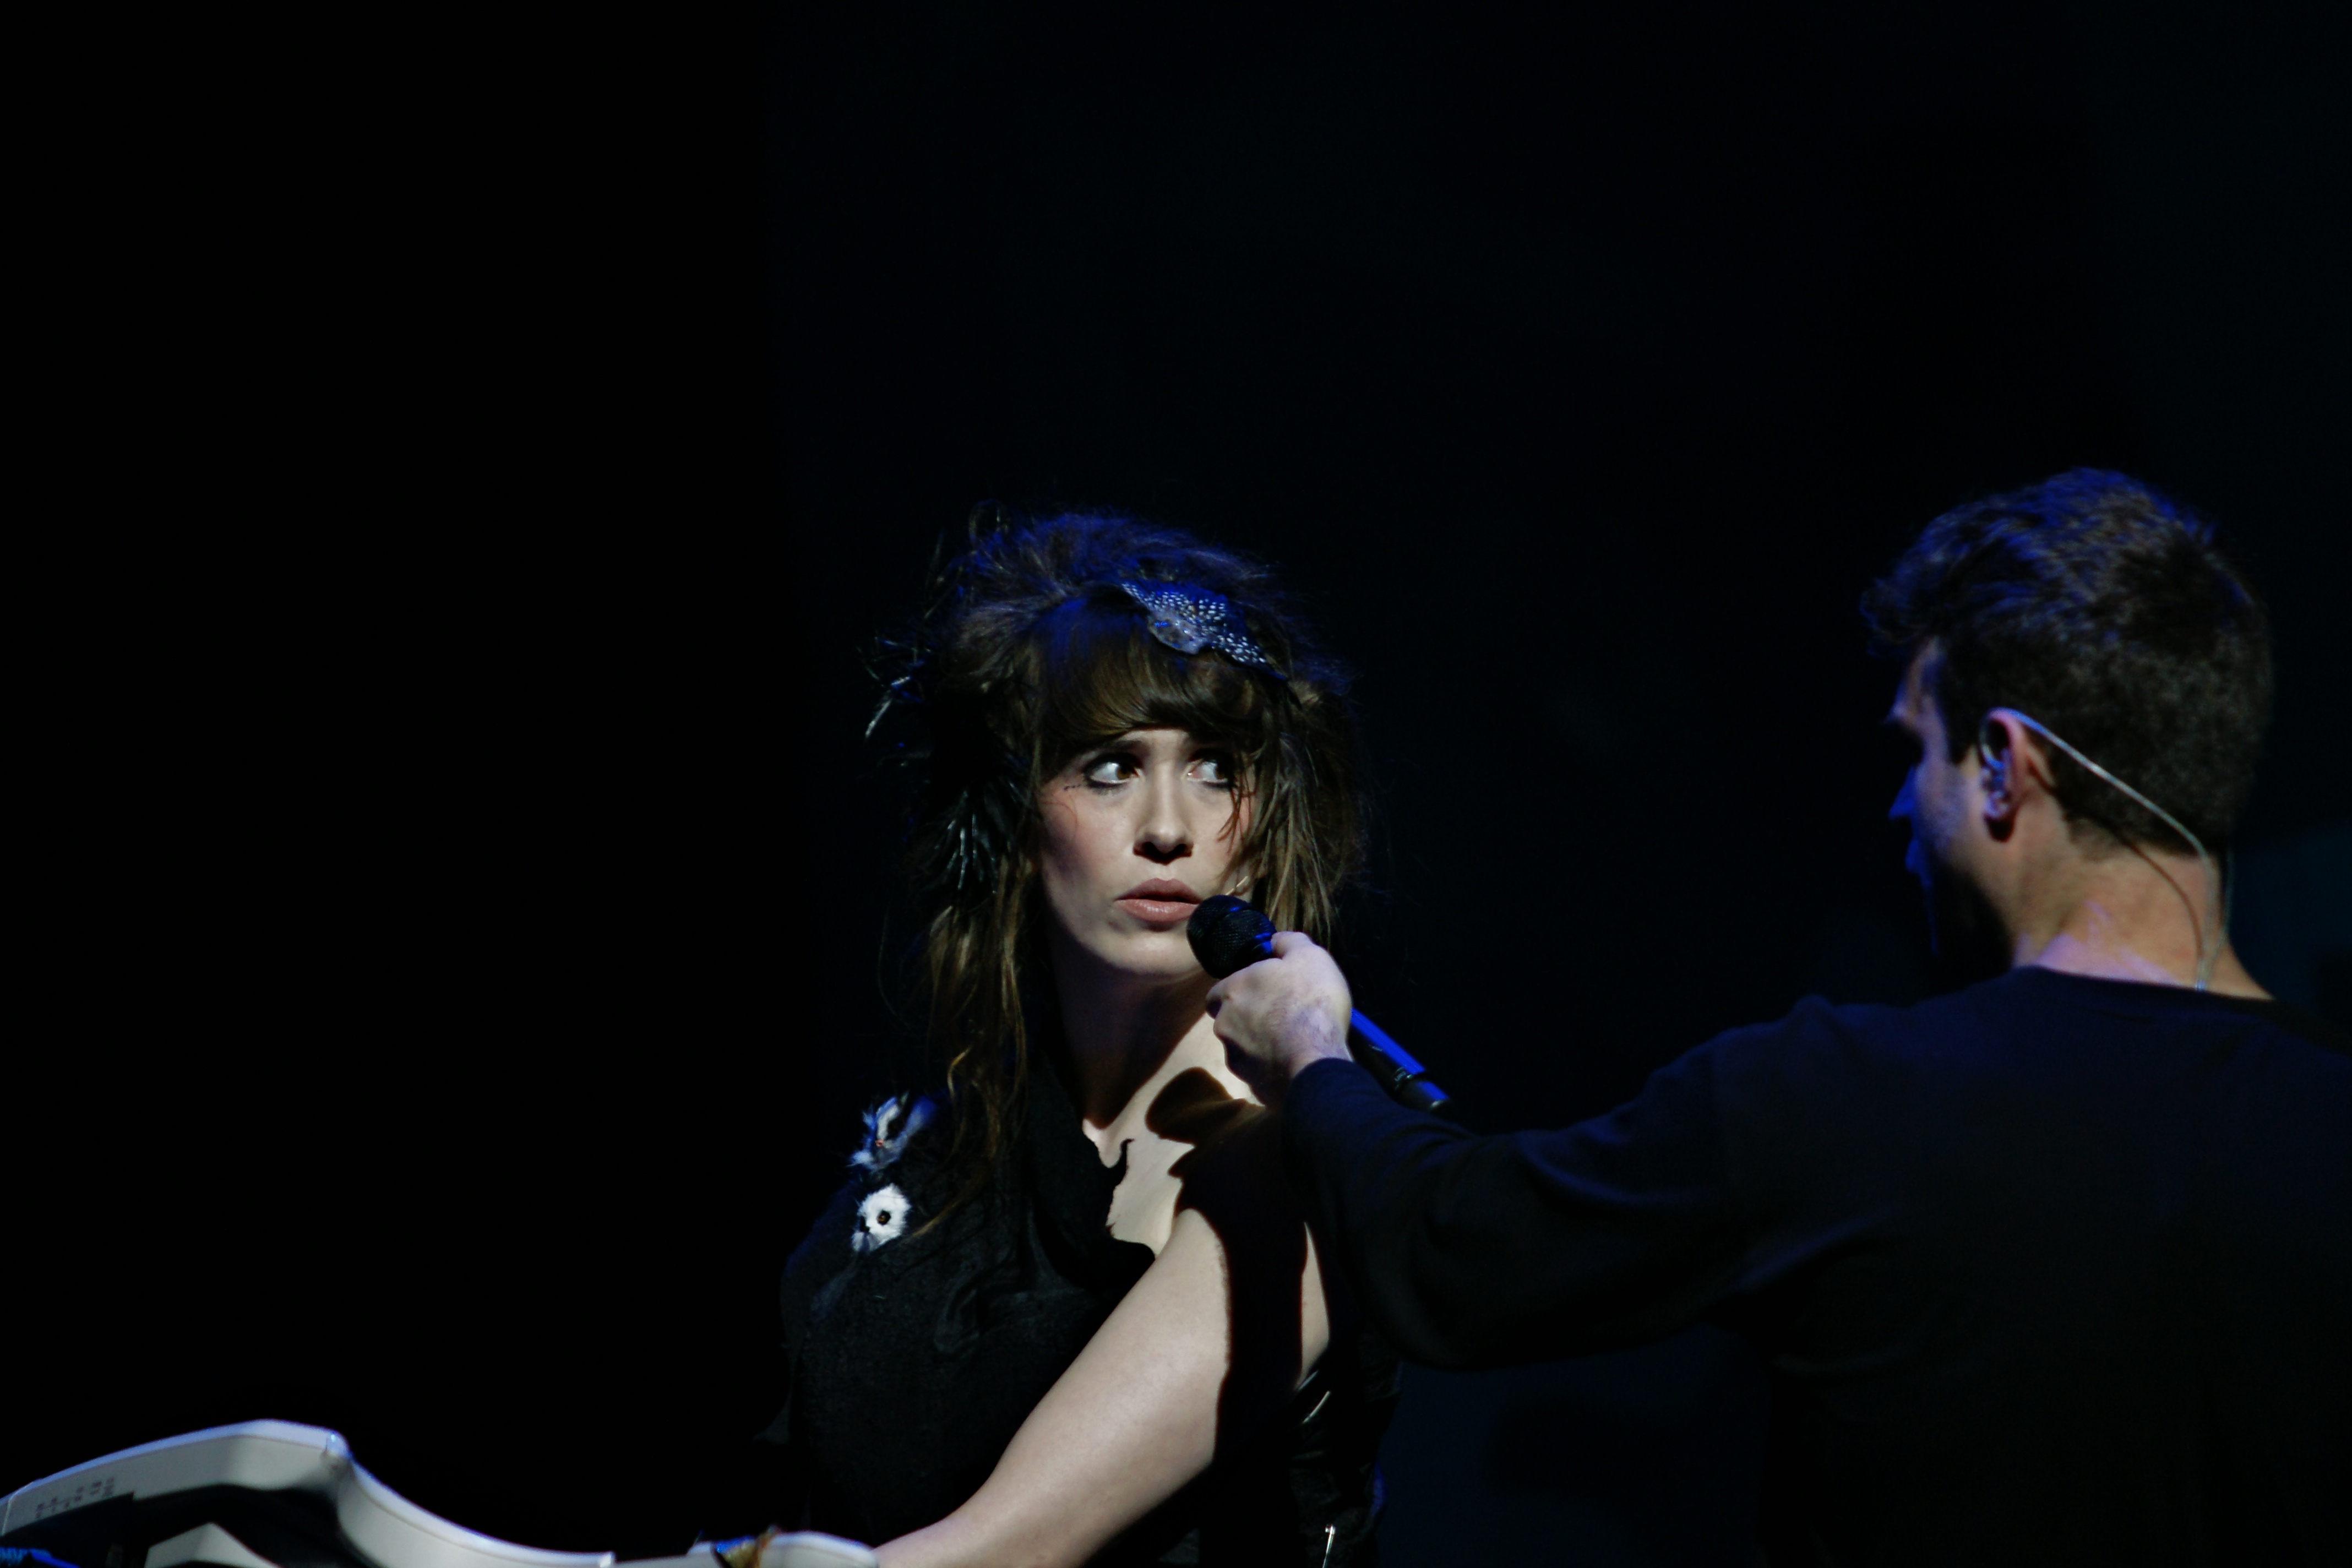 Imogen Heap staring at man holding microphone up to her